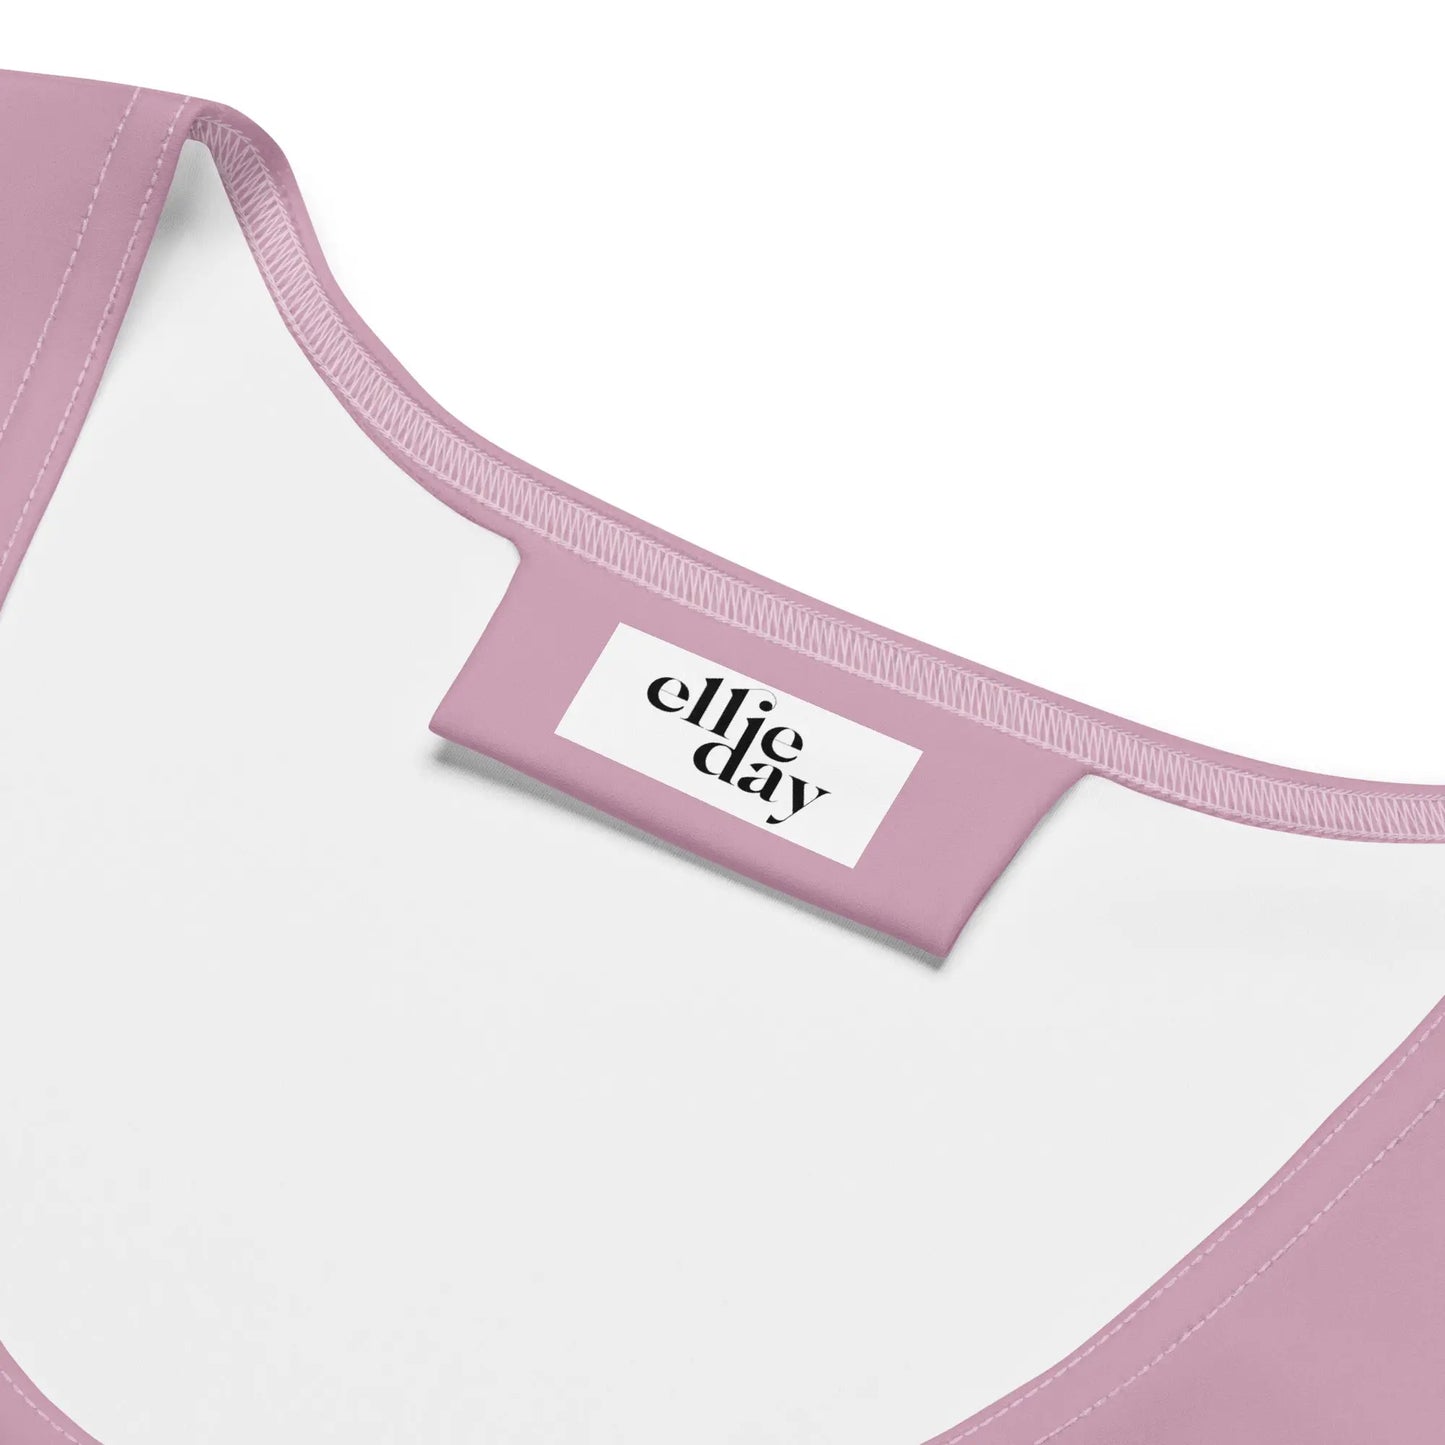 Sublimation Cut & Sew Tank Top Ellie Day Activewear